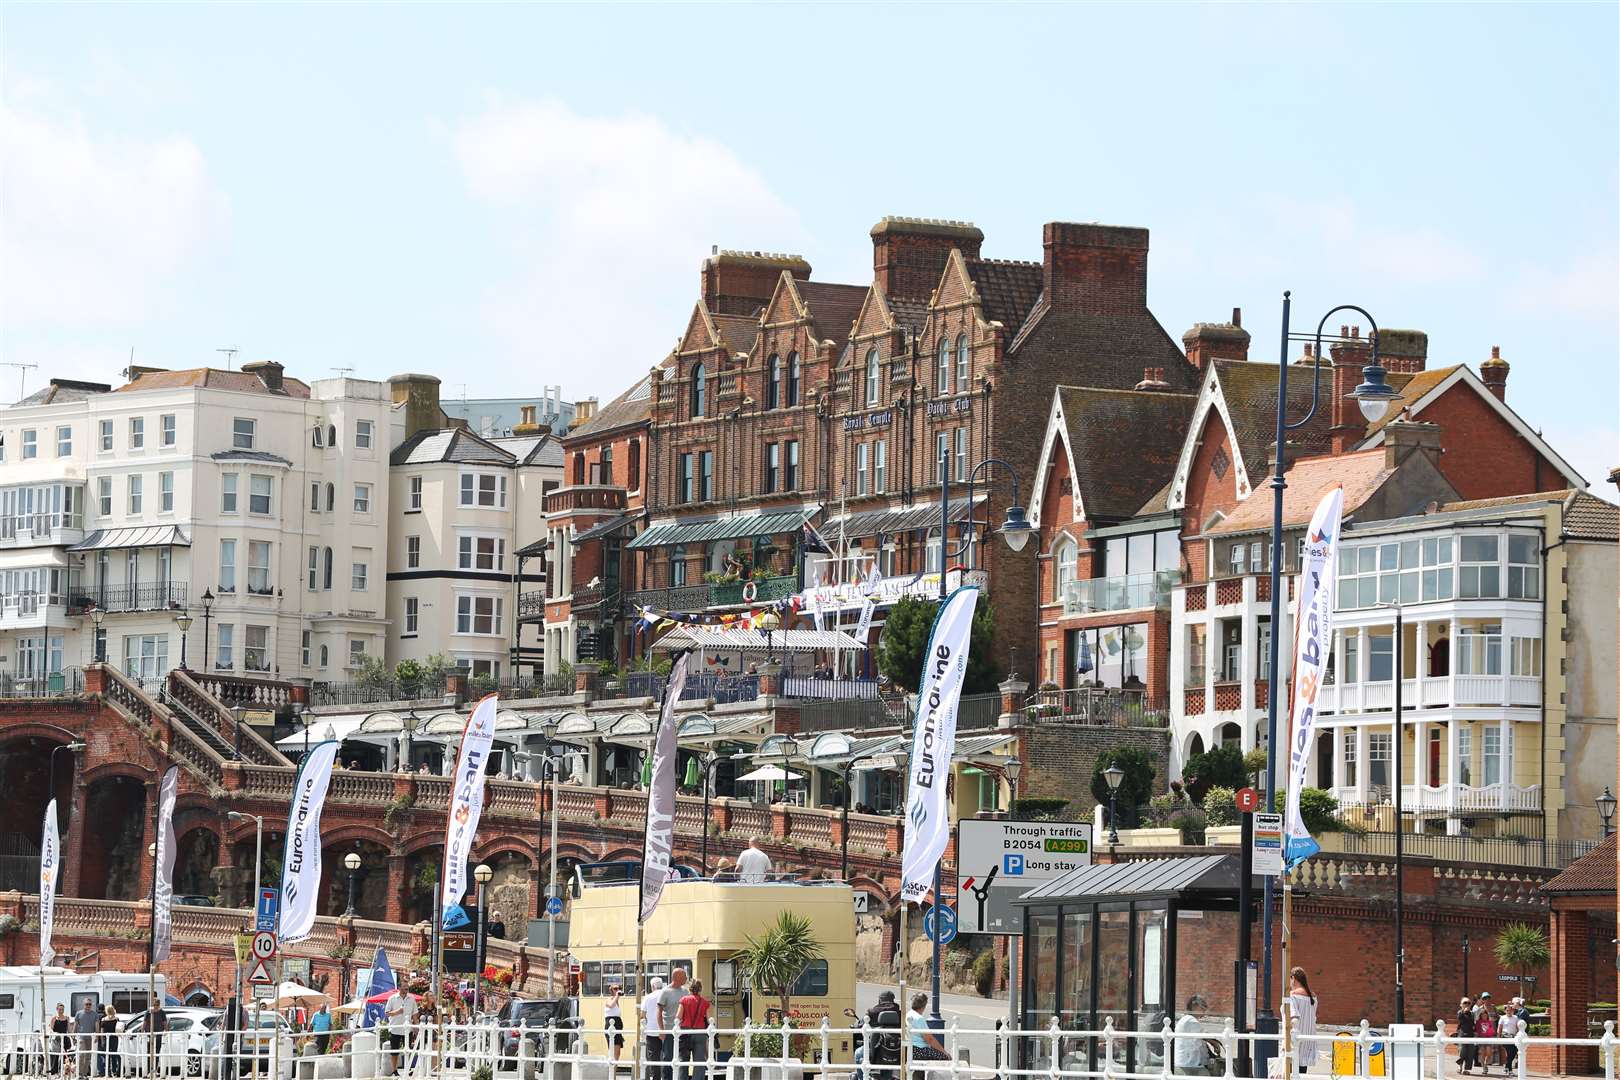 Boats from across the UK, Belgium, France and Netherlands took part in the Ramsgate Week regatta last year. Picture: Karen Cox/Ramsgate Week